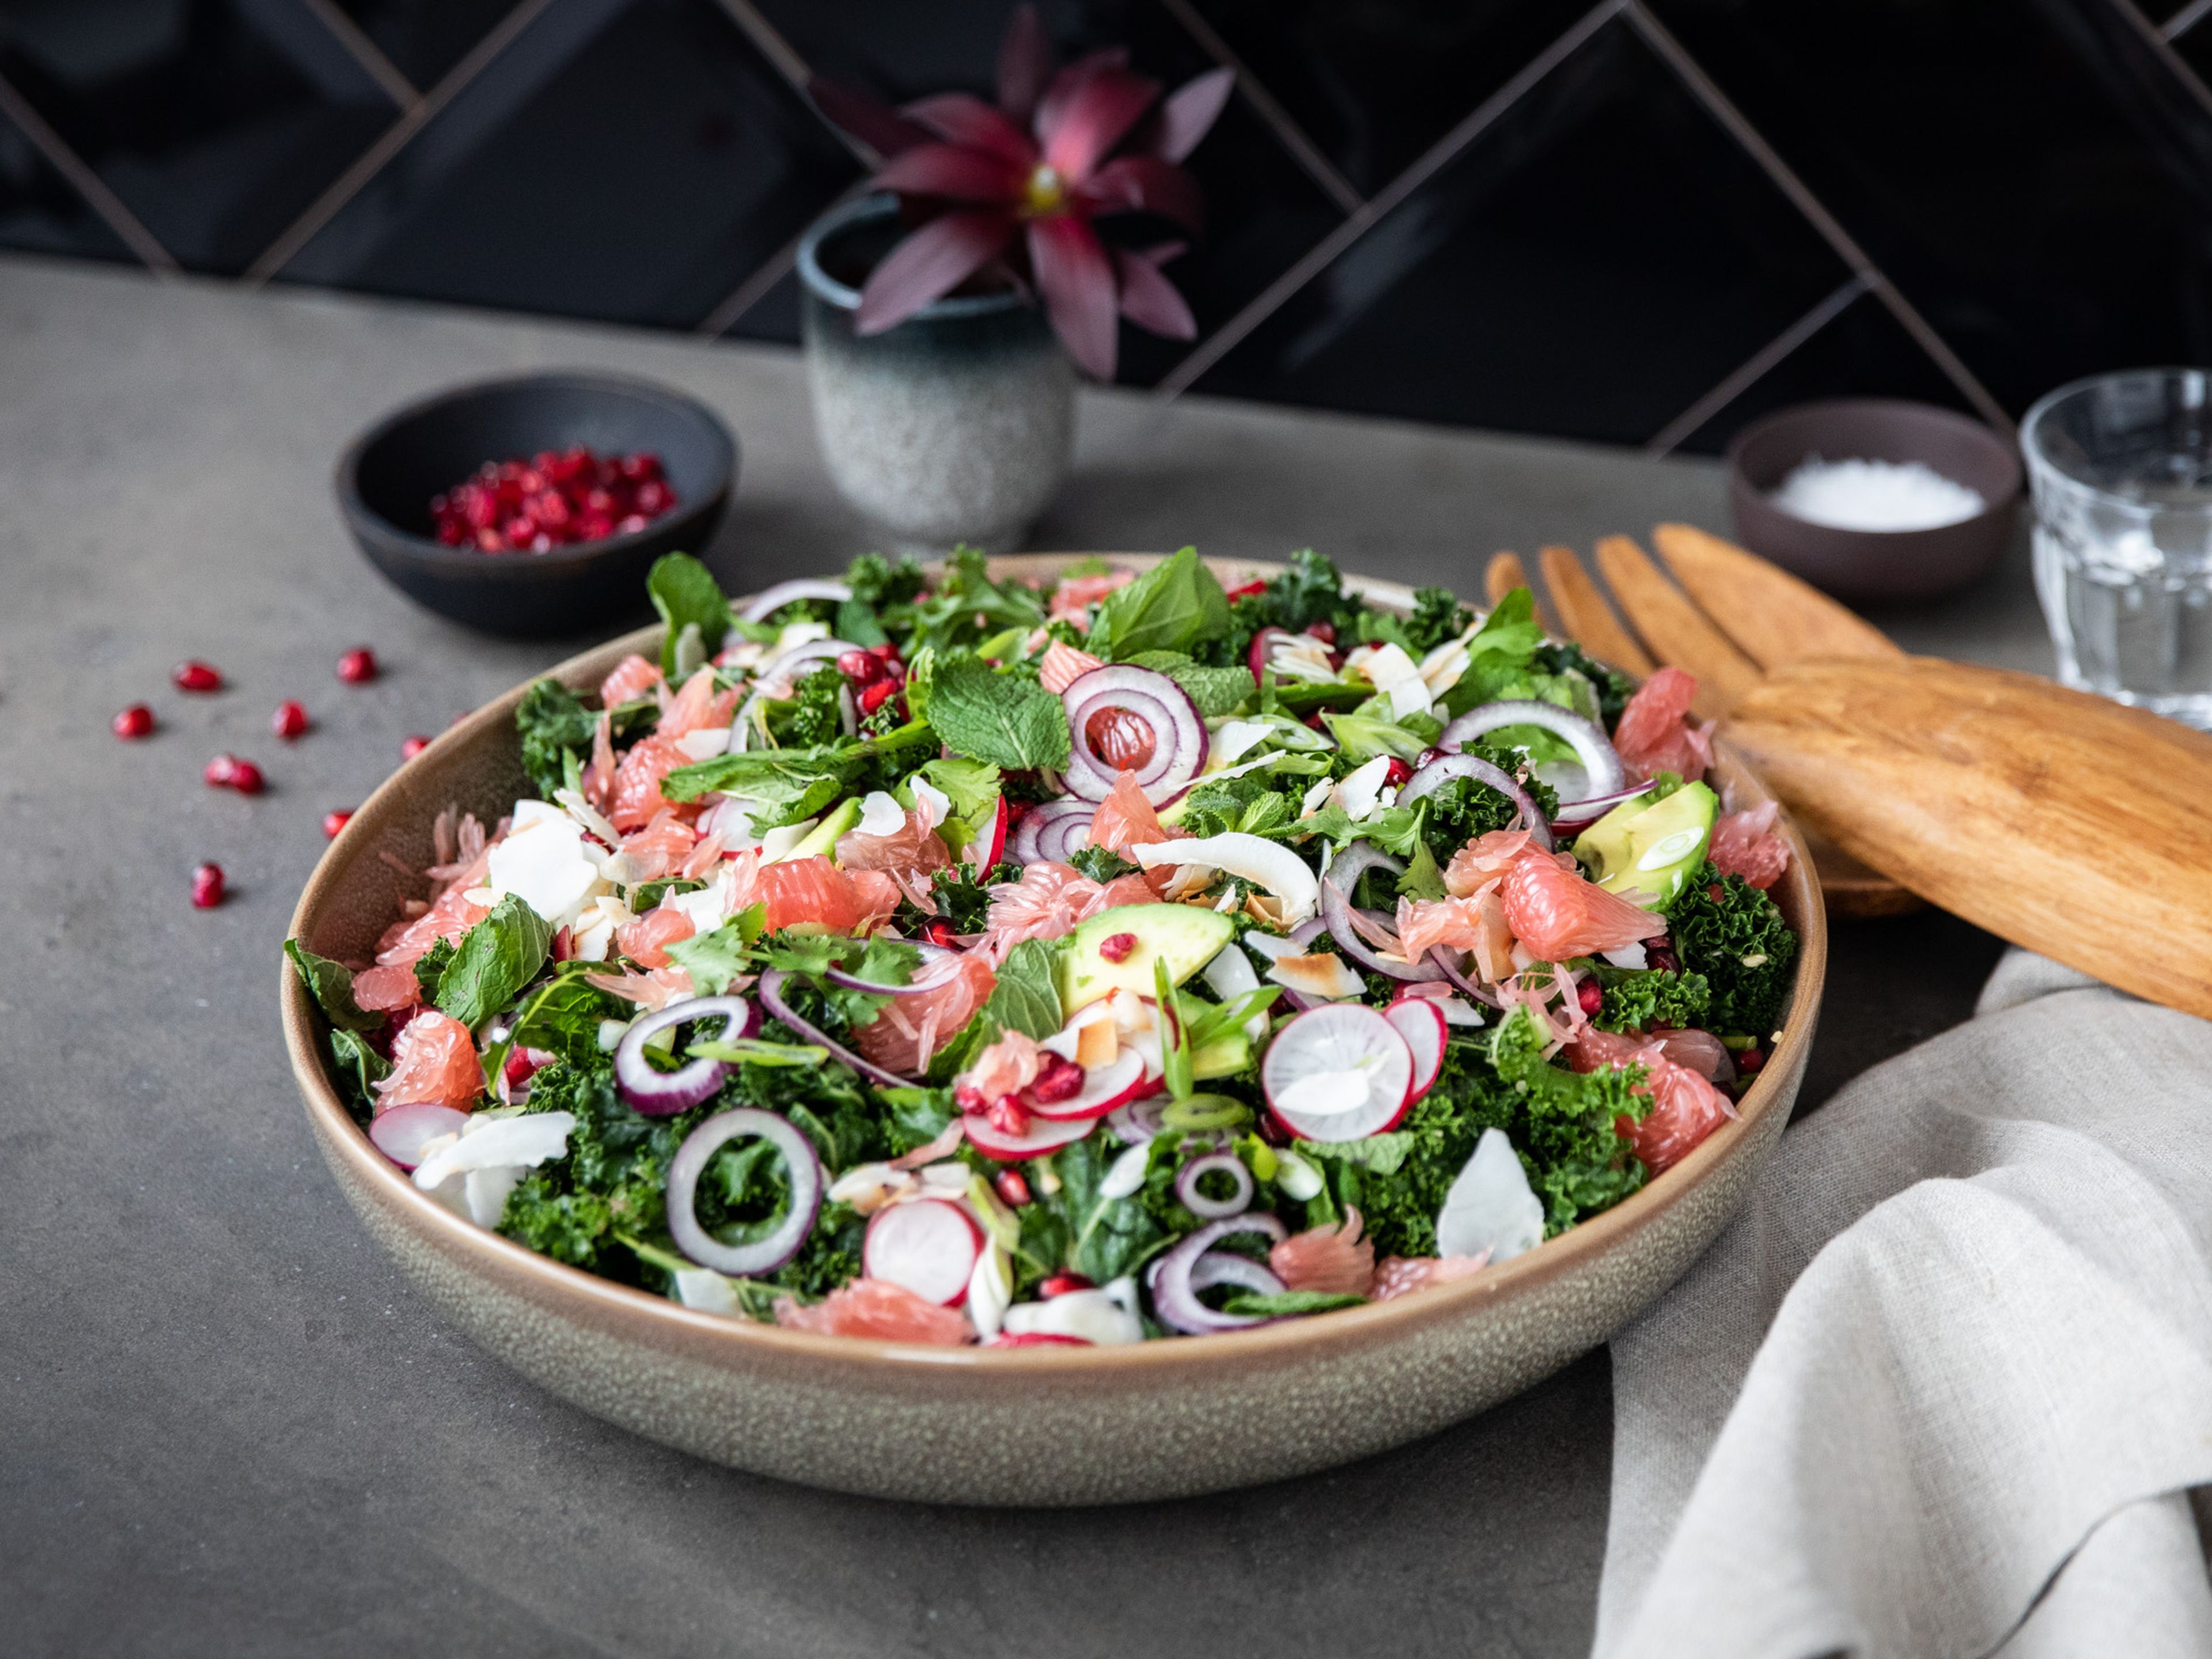 Pink pomelo salad with kale and avocado